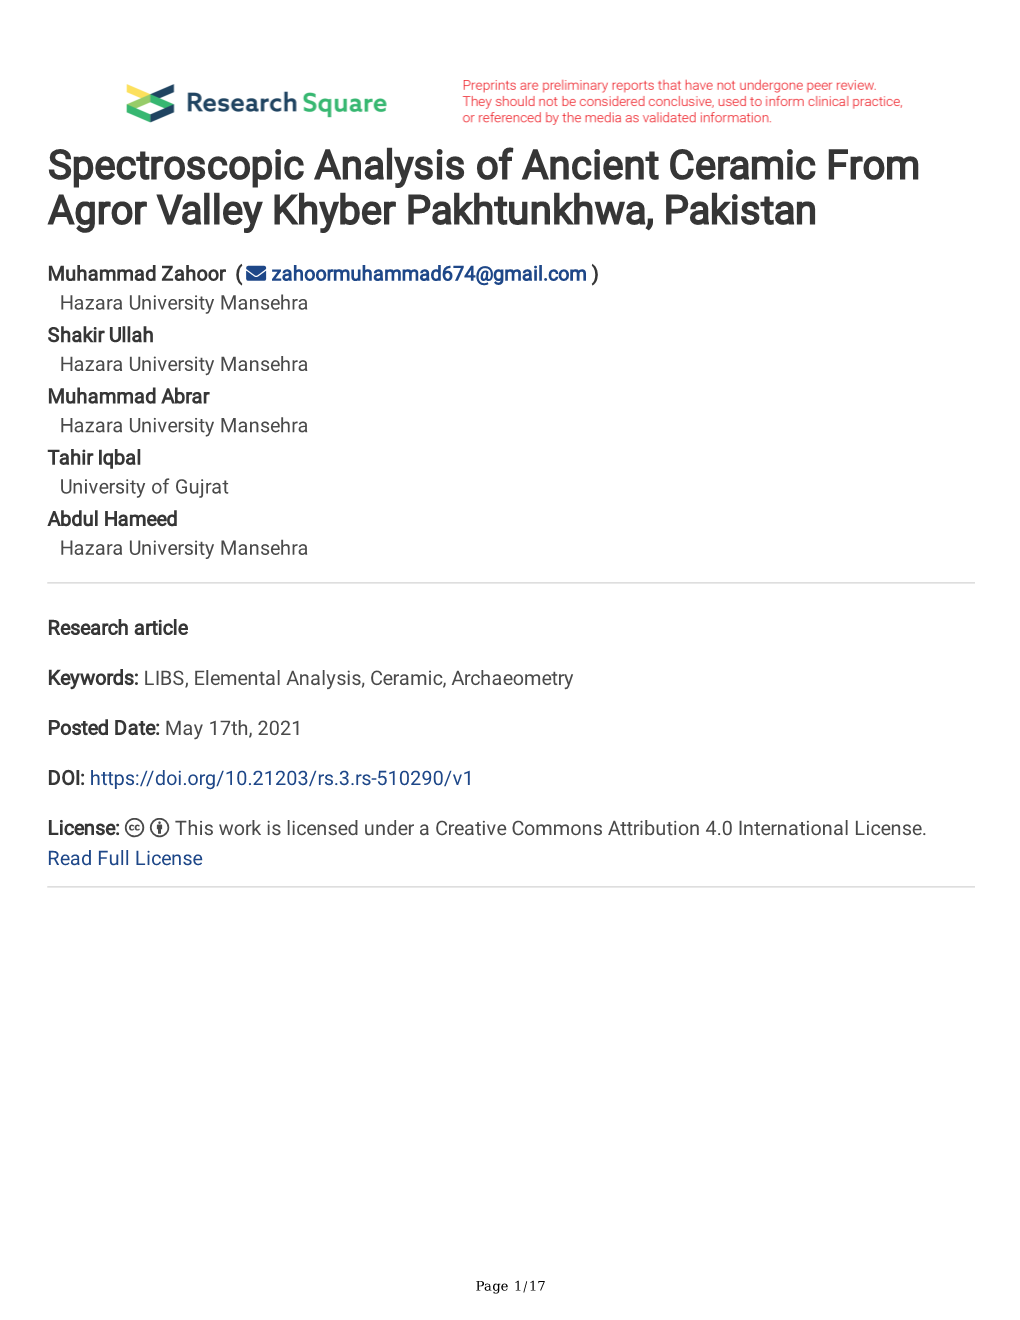 Spectroscopic Analysis of Ancient Ceramic from Agror Valley Khyber Pakhtunkhwa, Pakistan